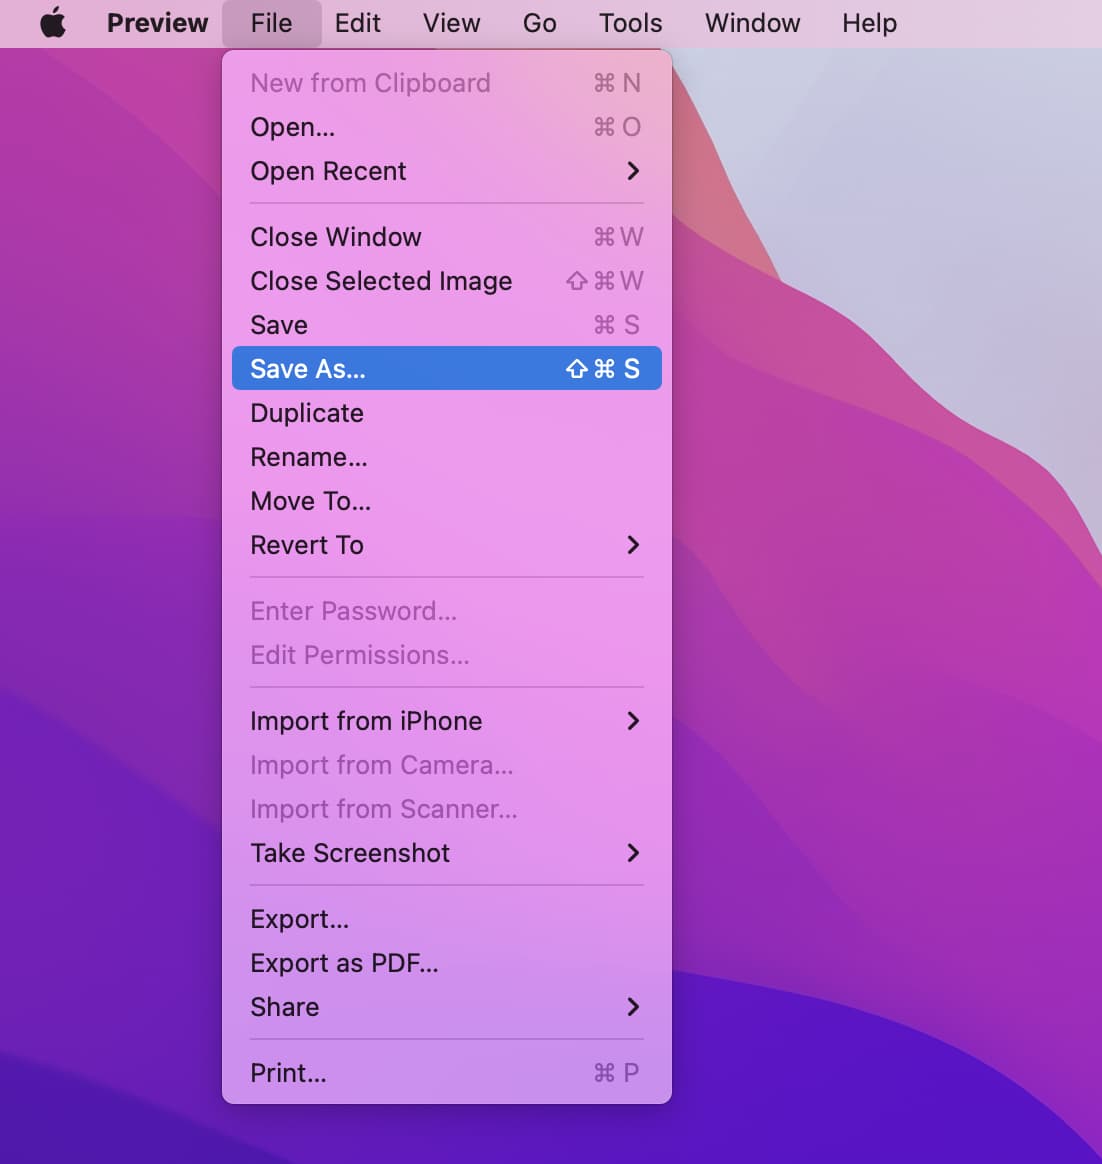 Save As option added permanently to Mac File menu